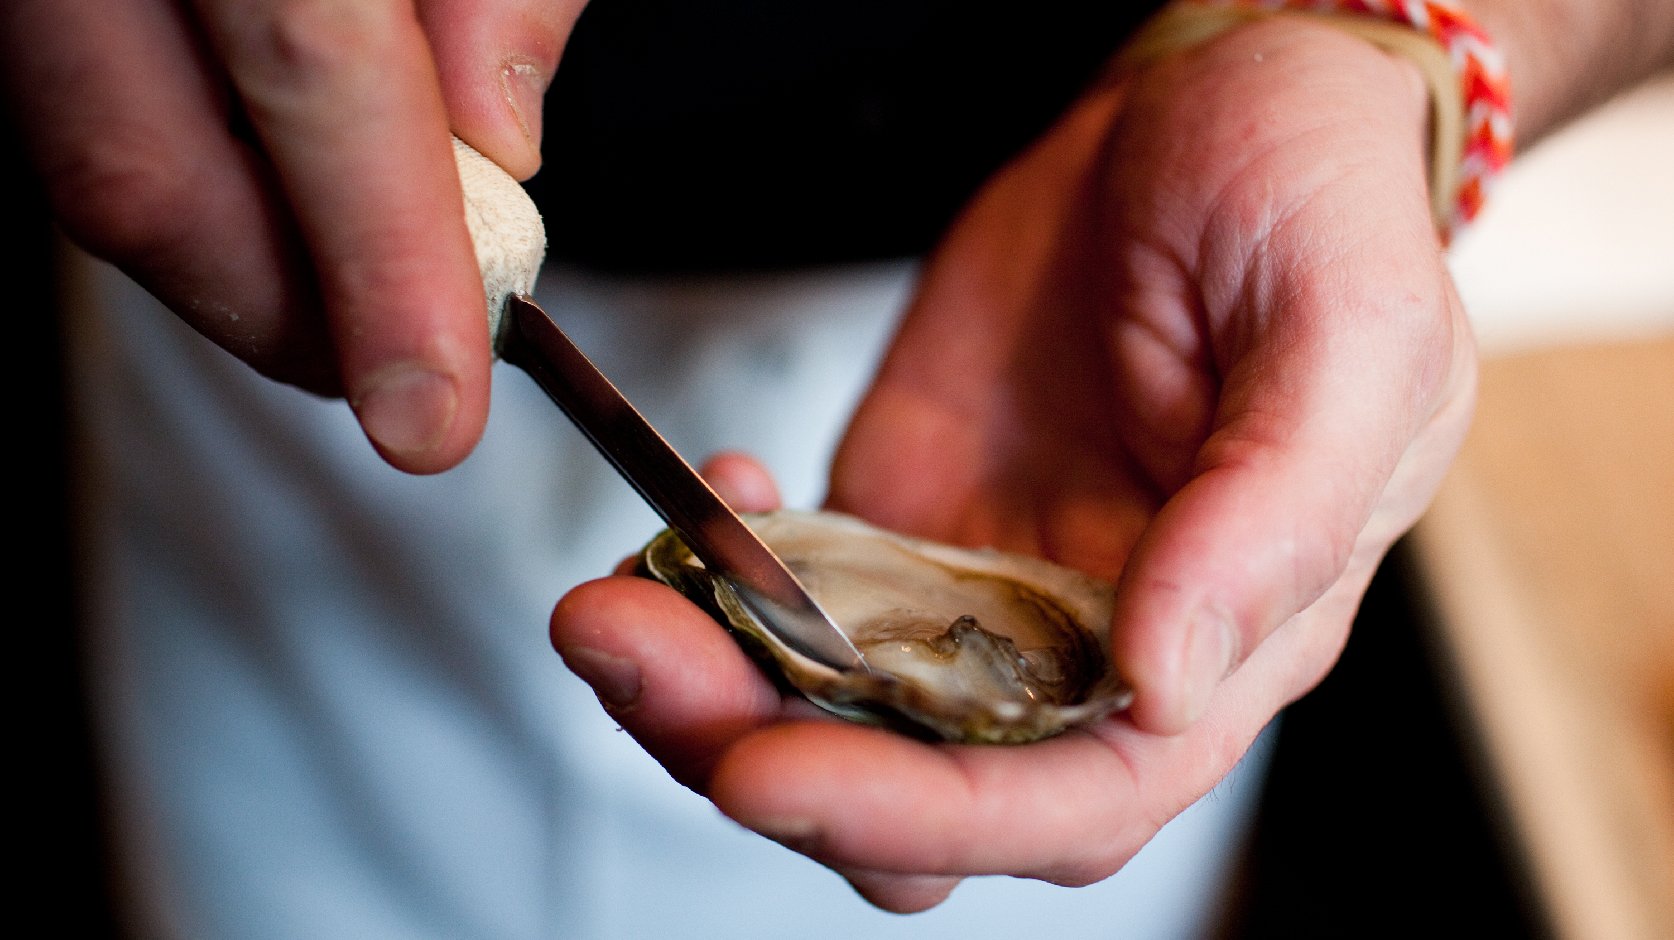 Then slice along bottom, make sure you hold steady to preserve the liquor inside. Your oyster will now slide right off.